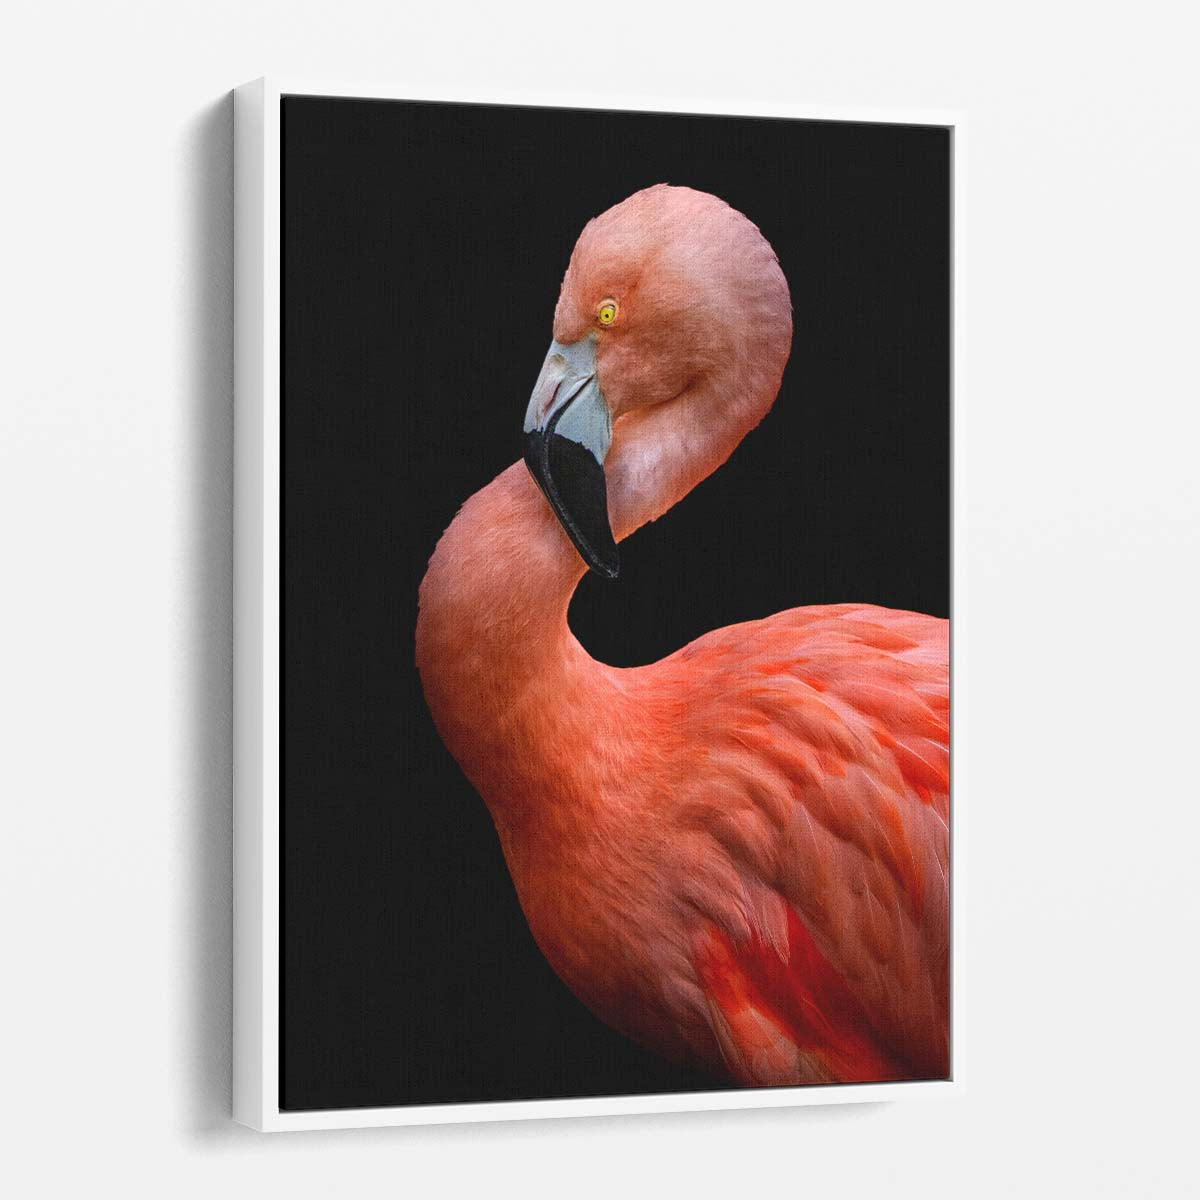 Hardik Pandya's Pink Flamingo Portrait, Colorful Feathered Animal Photography by Luxuriance Designs, made in USA